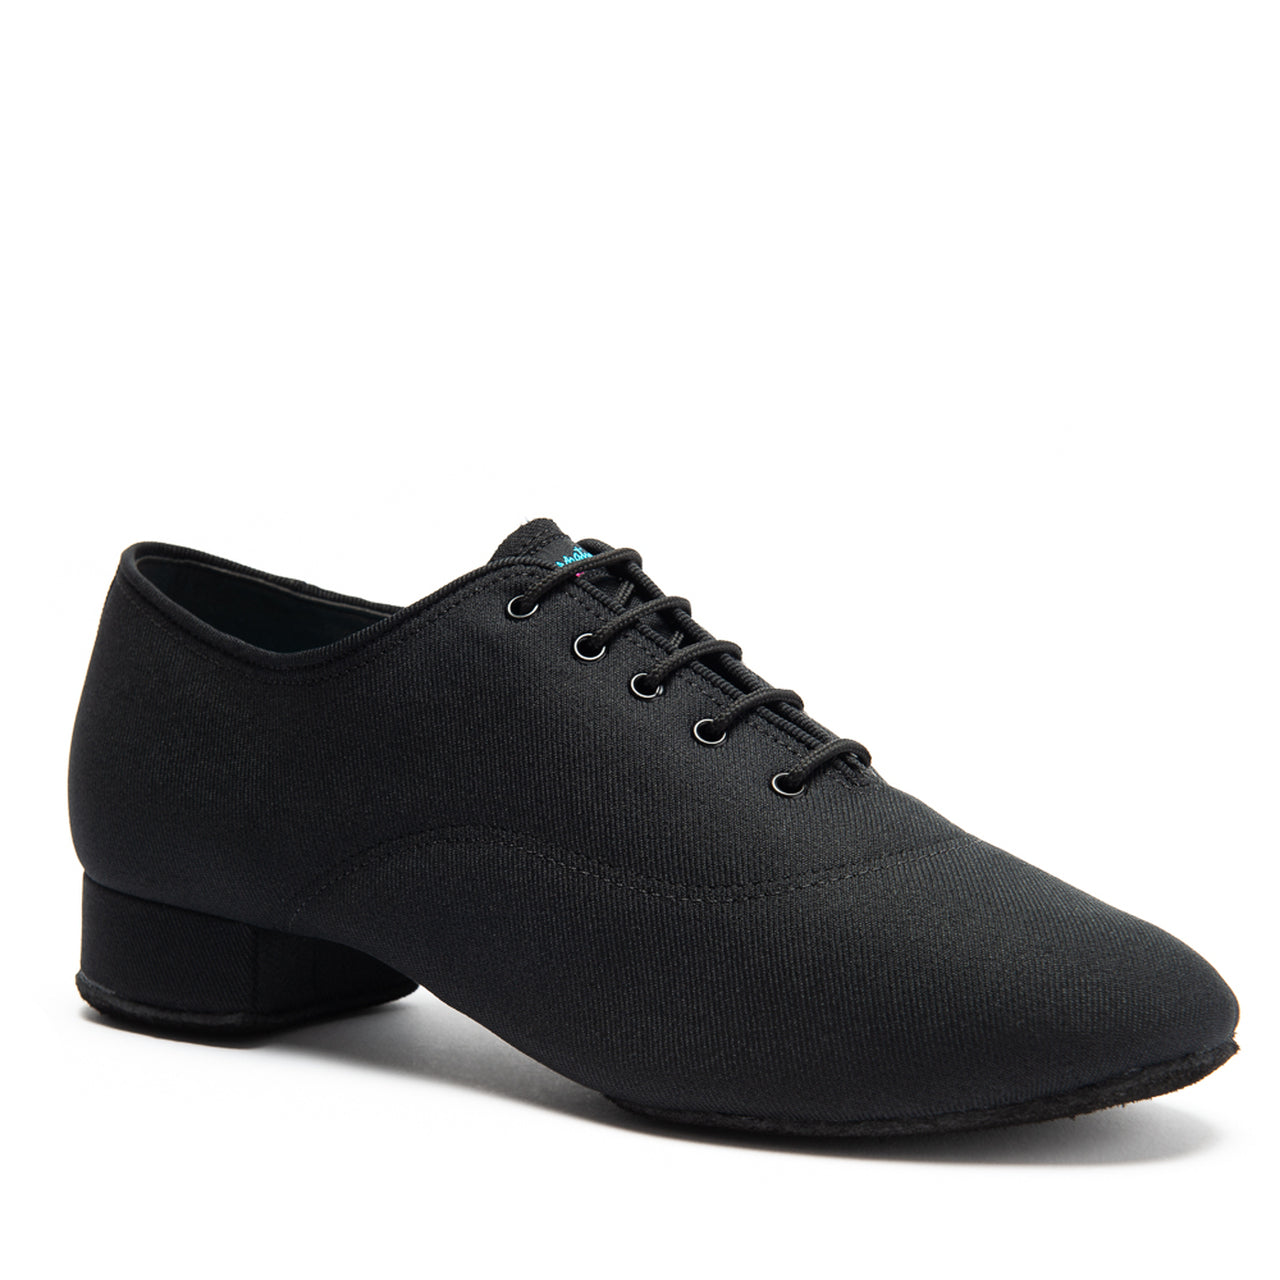 International Dance Shoes IDS Contra Men's Ballroom Dance Shoe Available in 4 Options